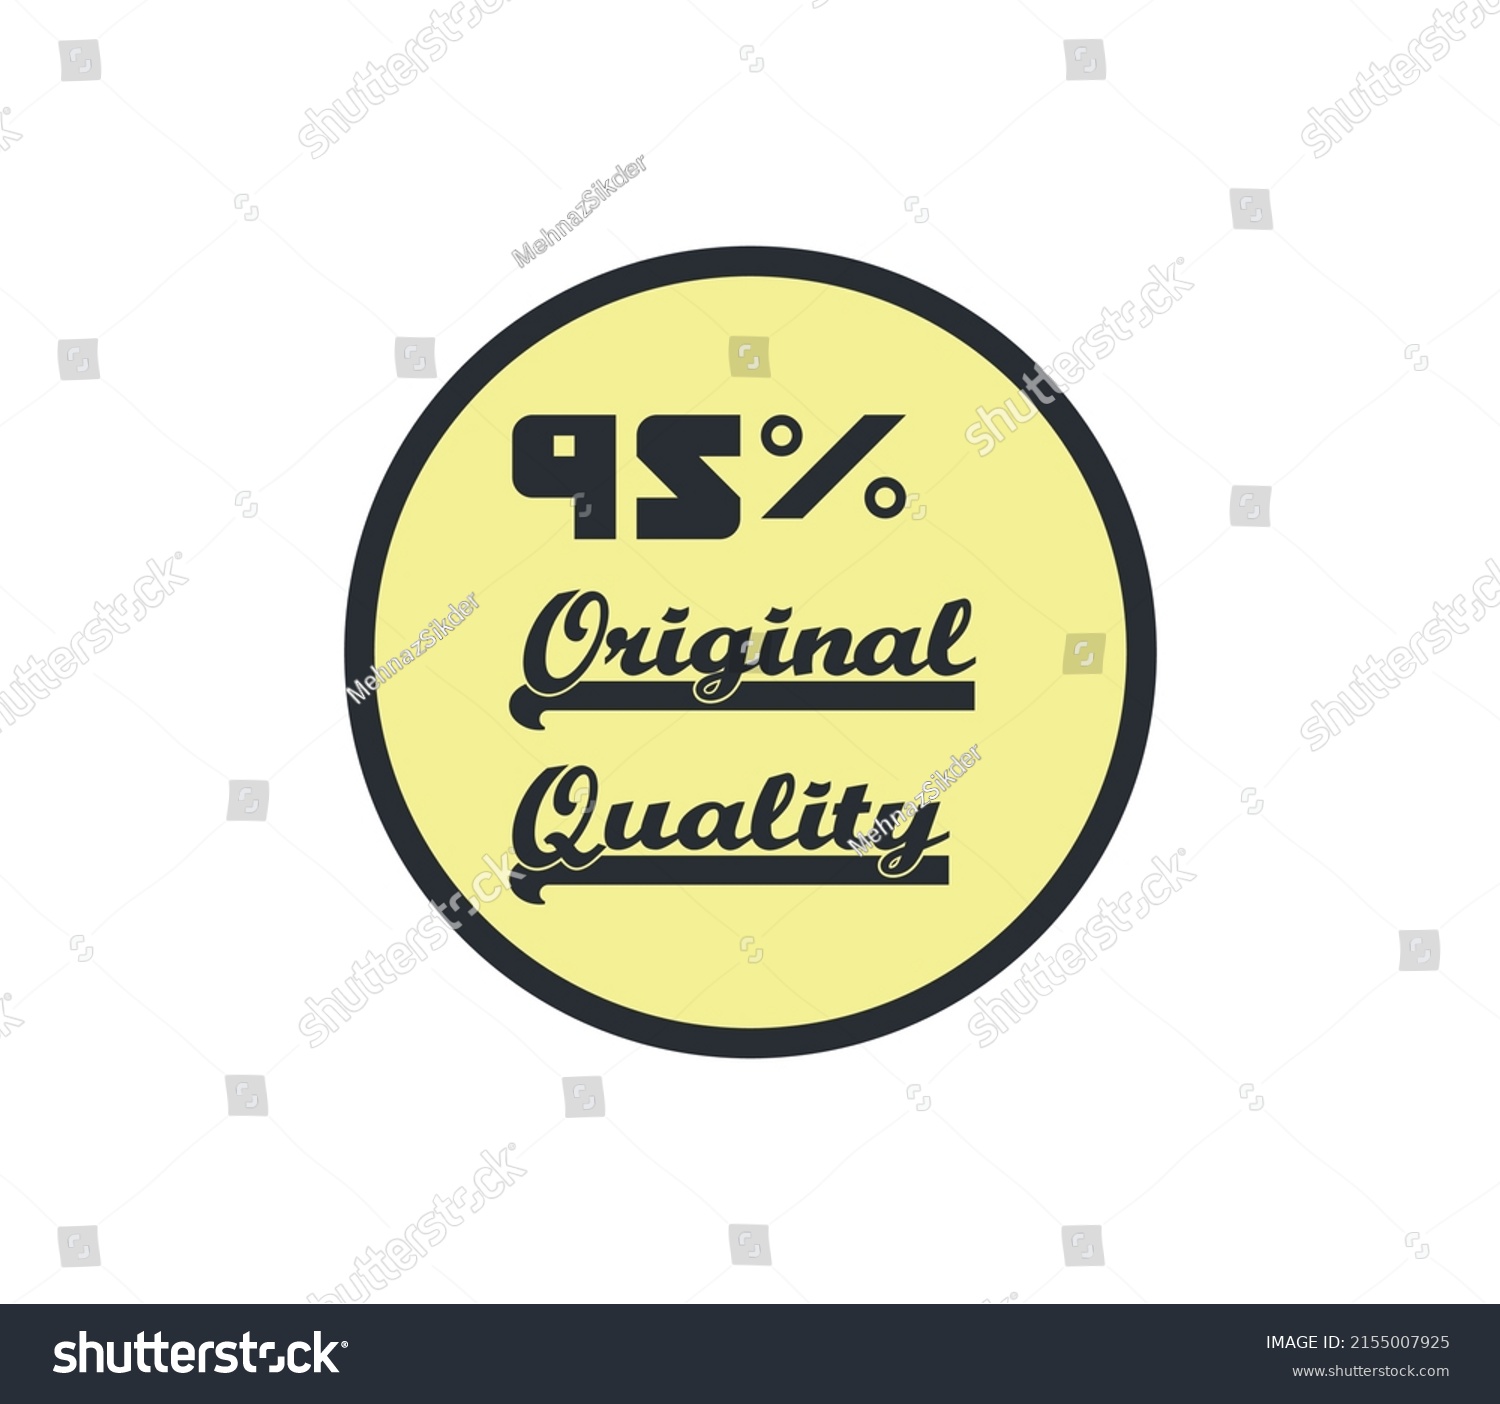 95% percentage original quality circular sign label vector art illustration with fantastic font and yellow background #2155007925